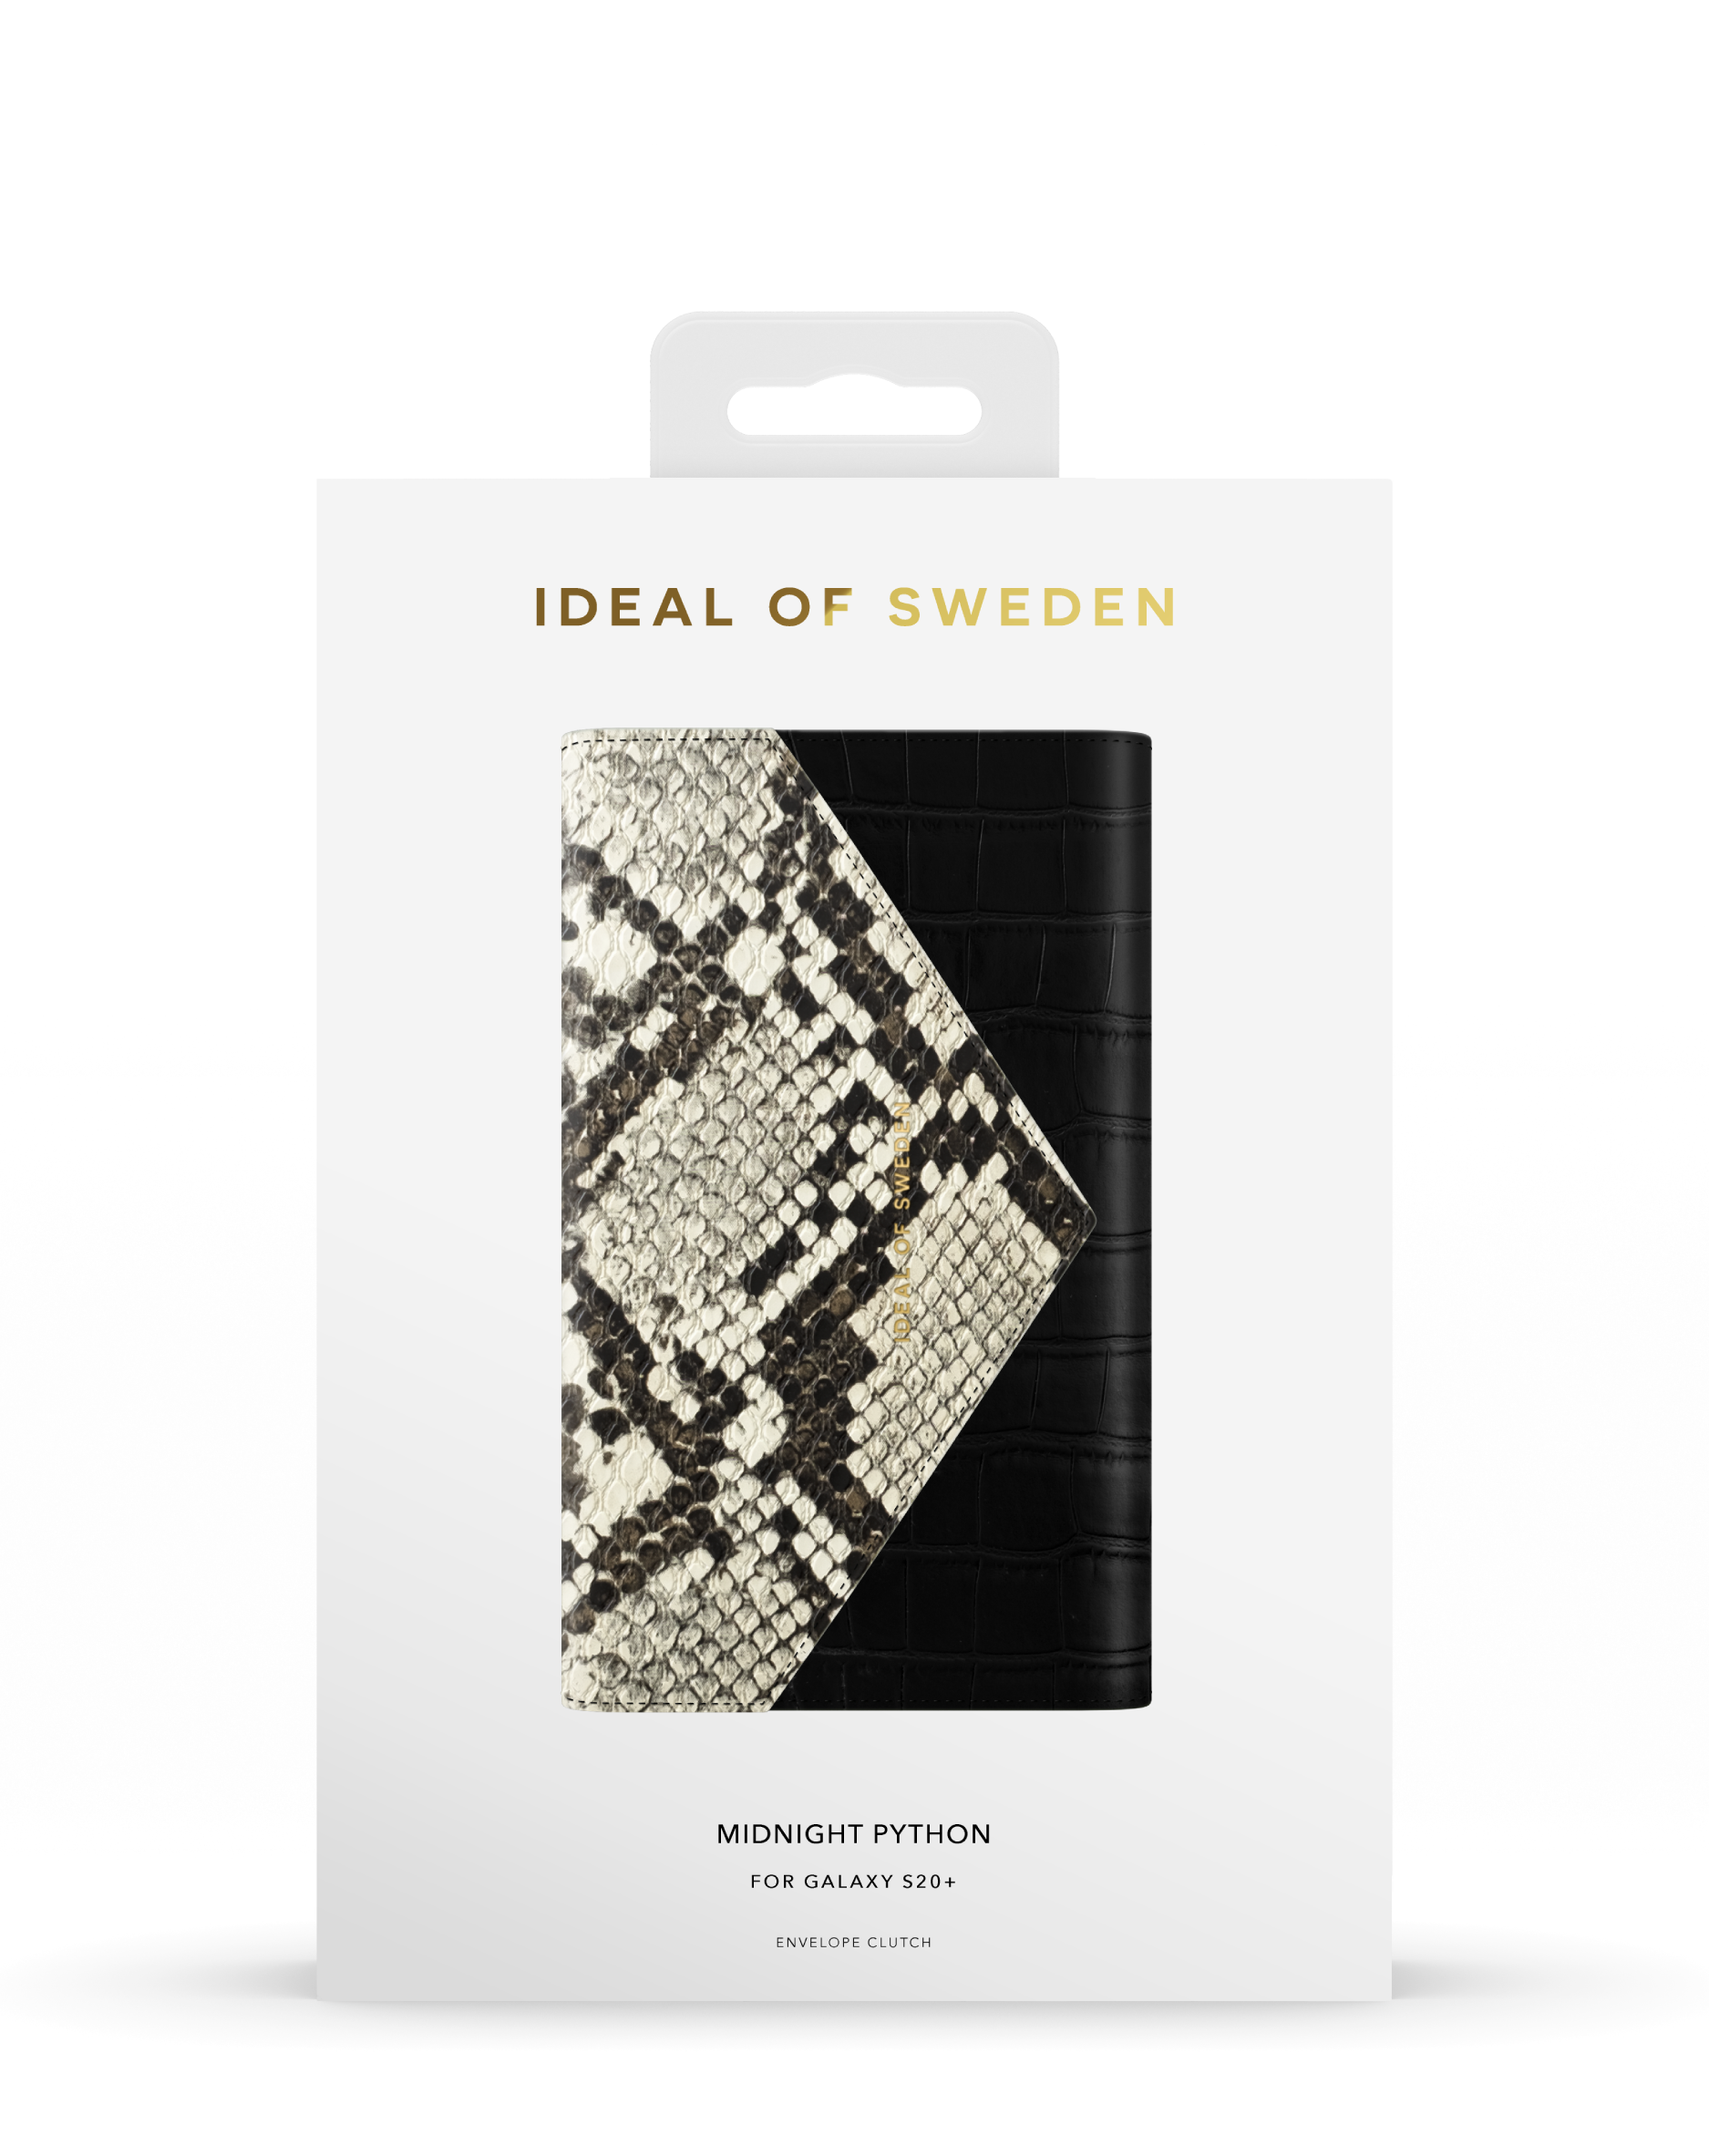 IDECSS20-S11P-199, Ultra, S20 Cover, Python Midnight IDEAL Full Samsung, SWEDEN Galaxy OF